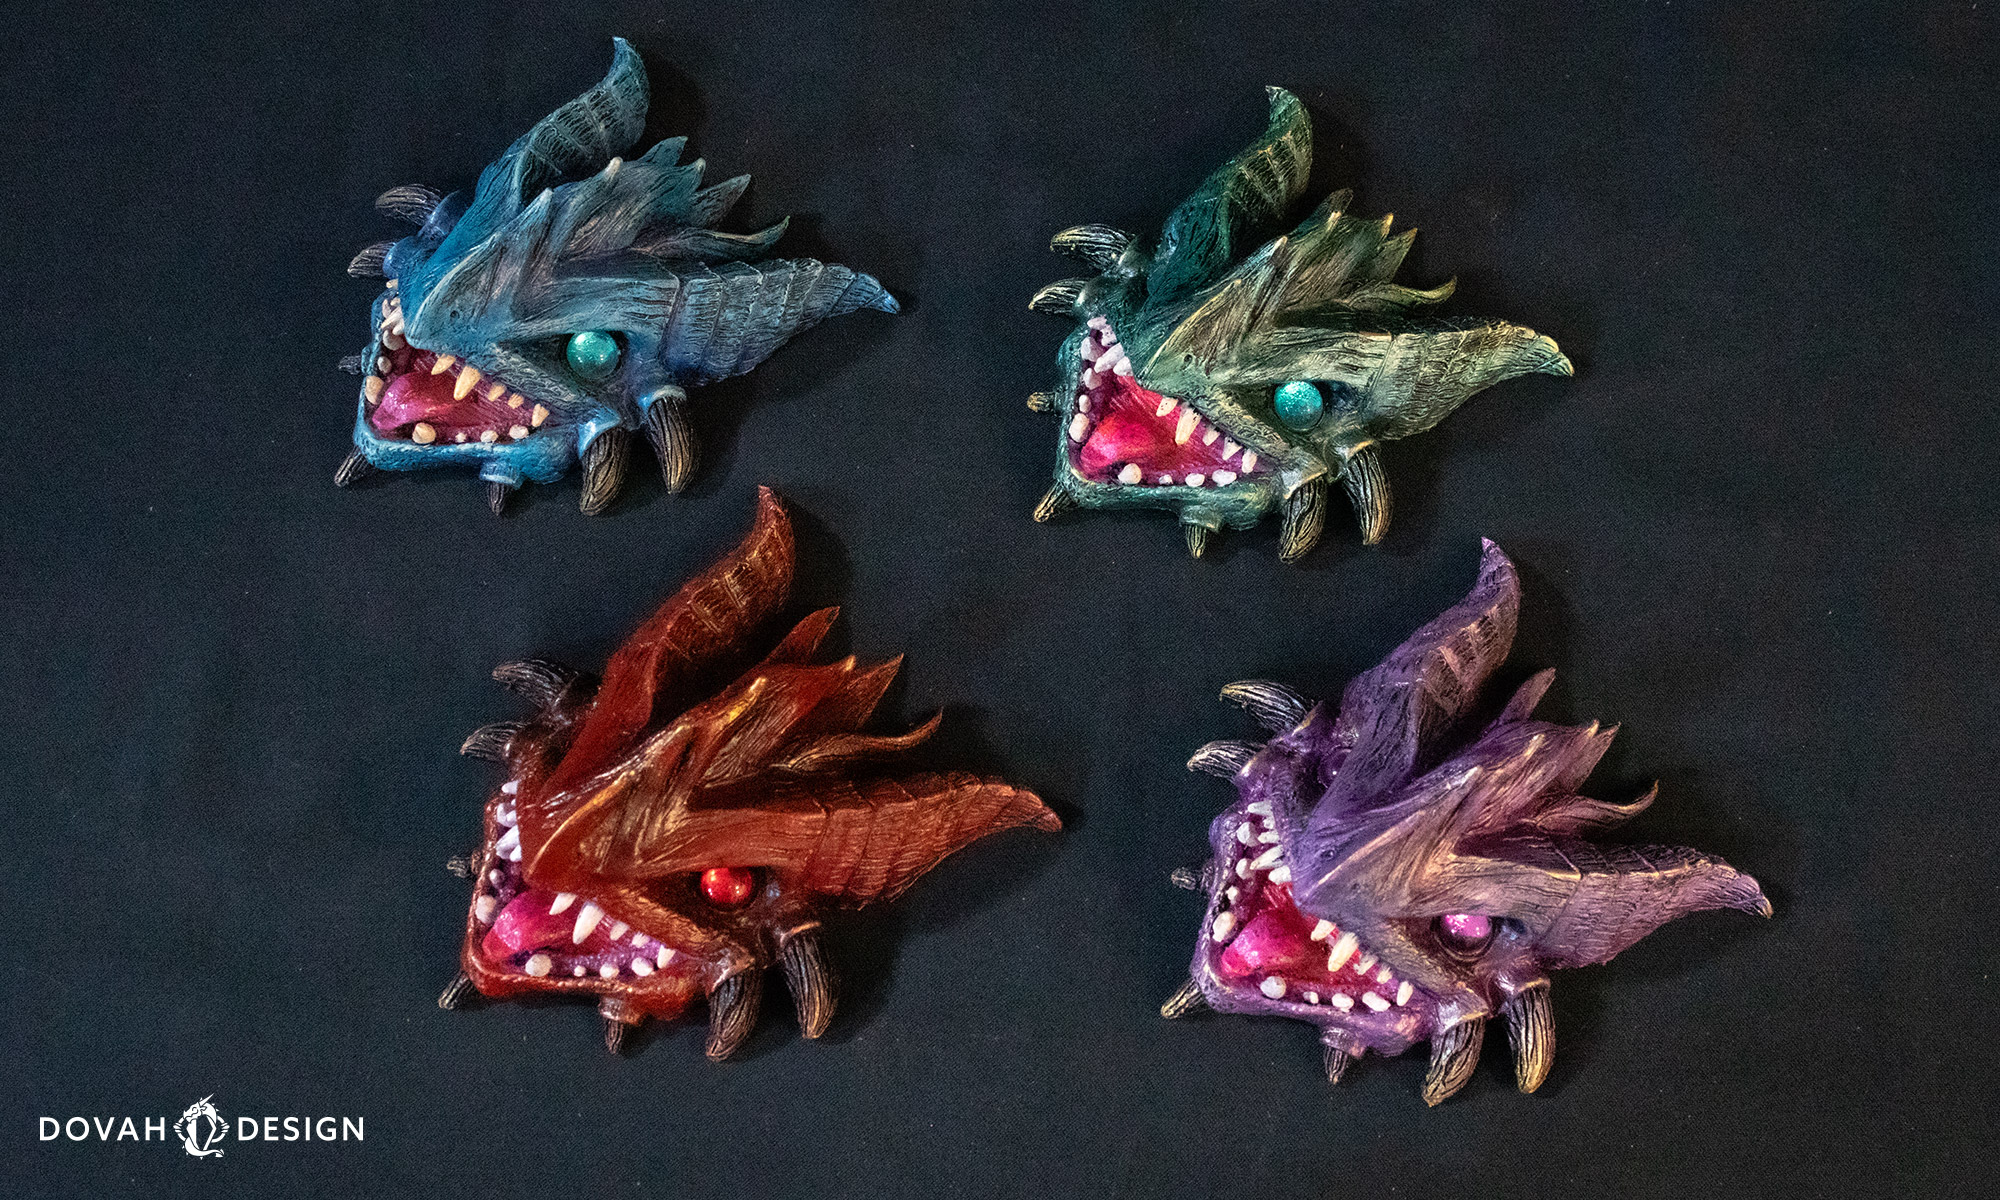 Four dragon wall decor sculptures in blue, red, purple, and green, sitting on a black table.